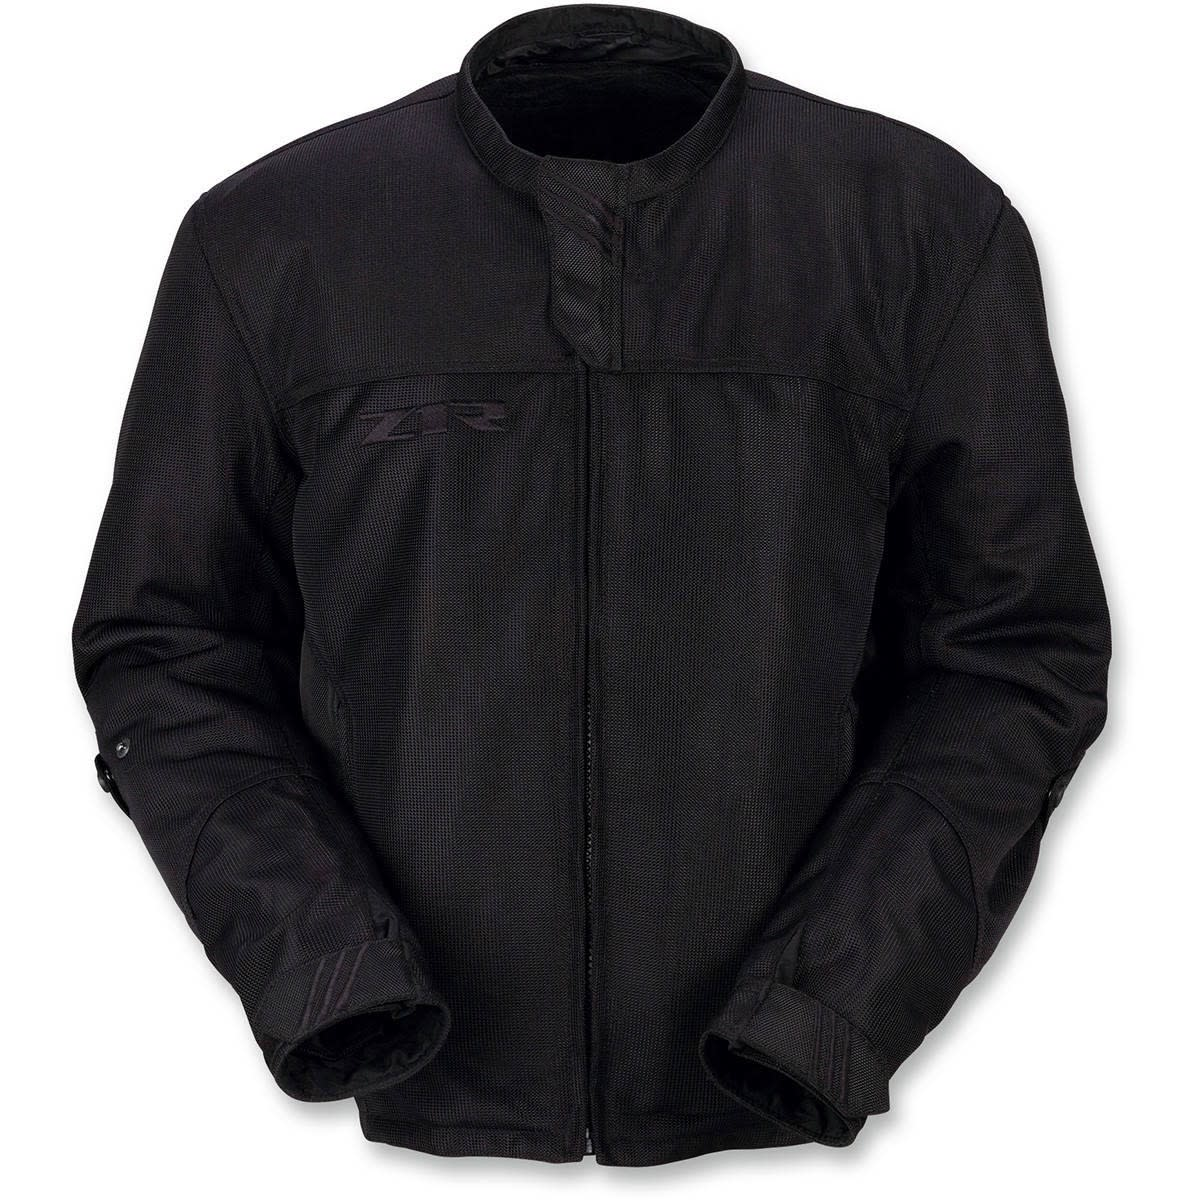 z1r jackets s gust mesh - motorcycle